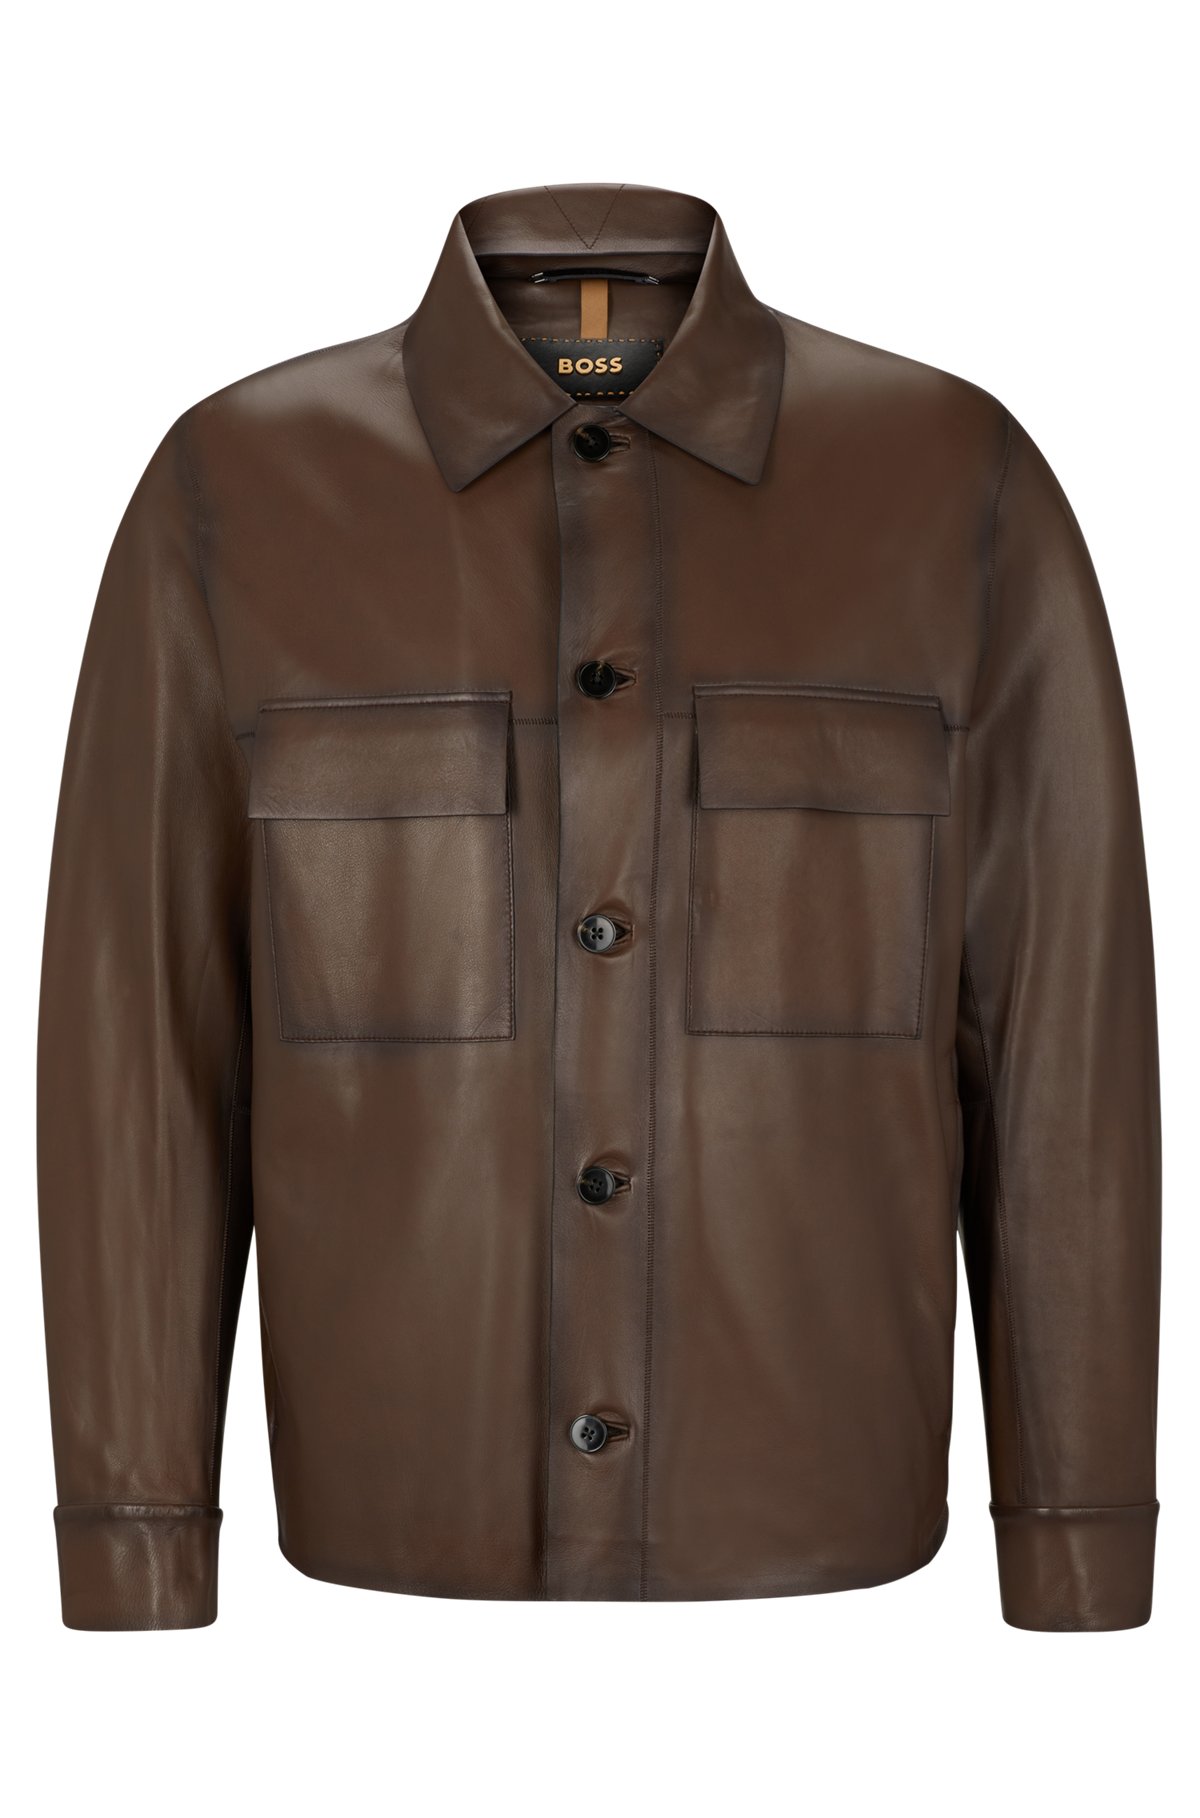 BOSS Ribbed Edging Suede Jacket in Brown for Men